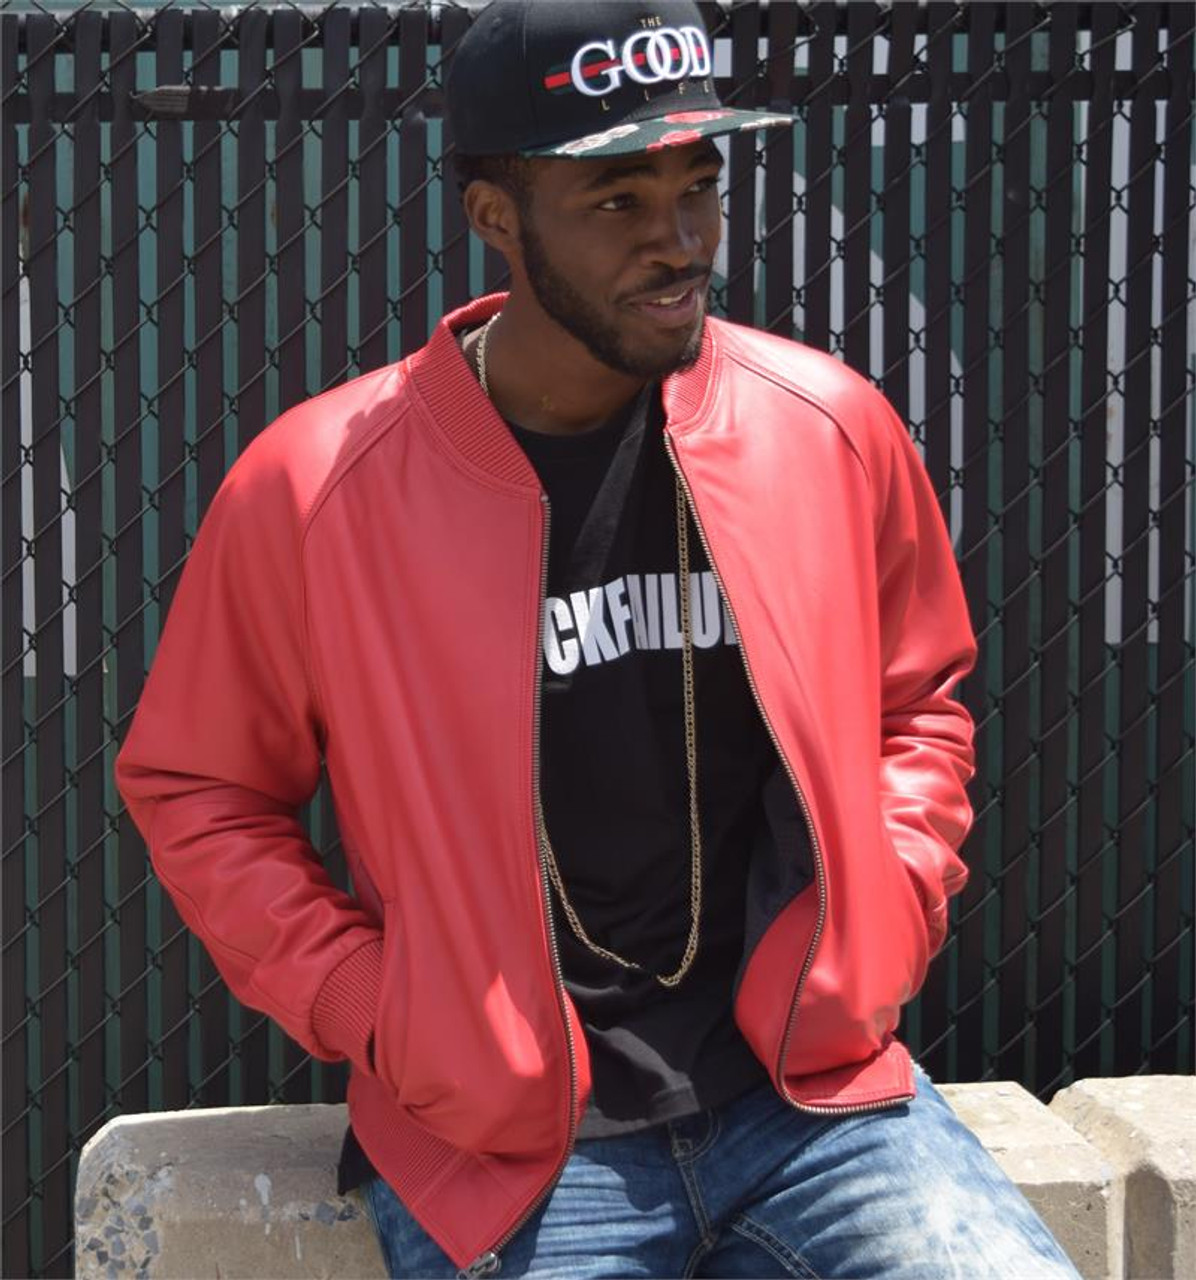 Mens Red Leather Baseball Jersey- ChersDelights Leather Apparel